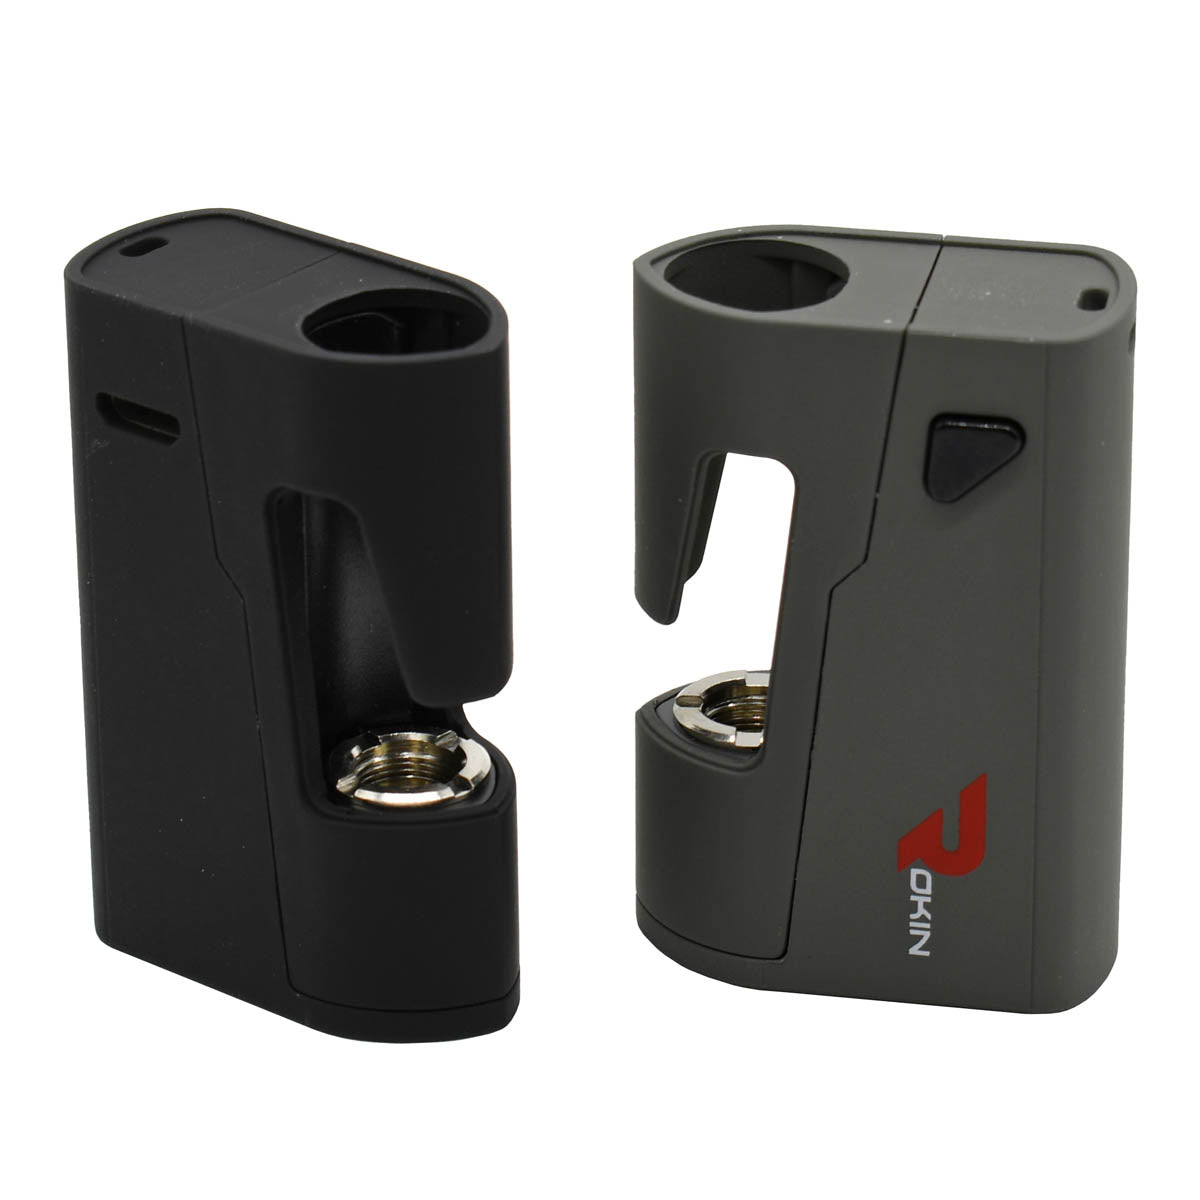 Black and Gray color options of Rage 510 Cartridge Battery